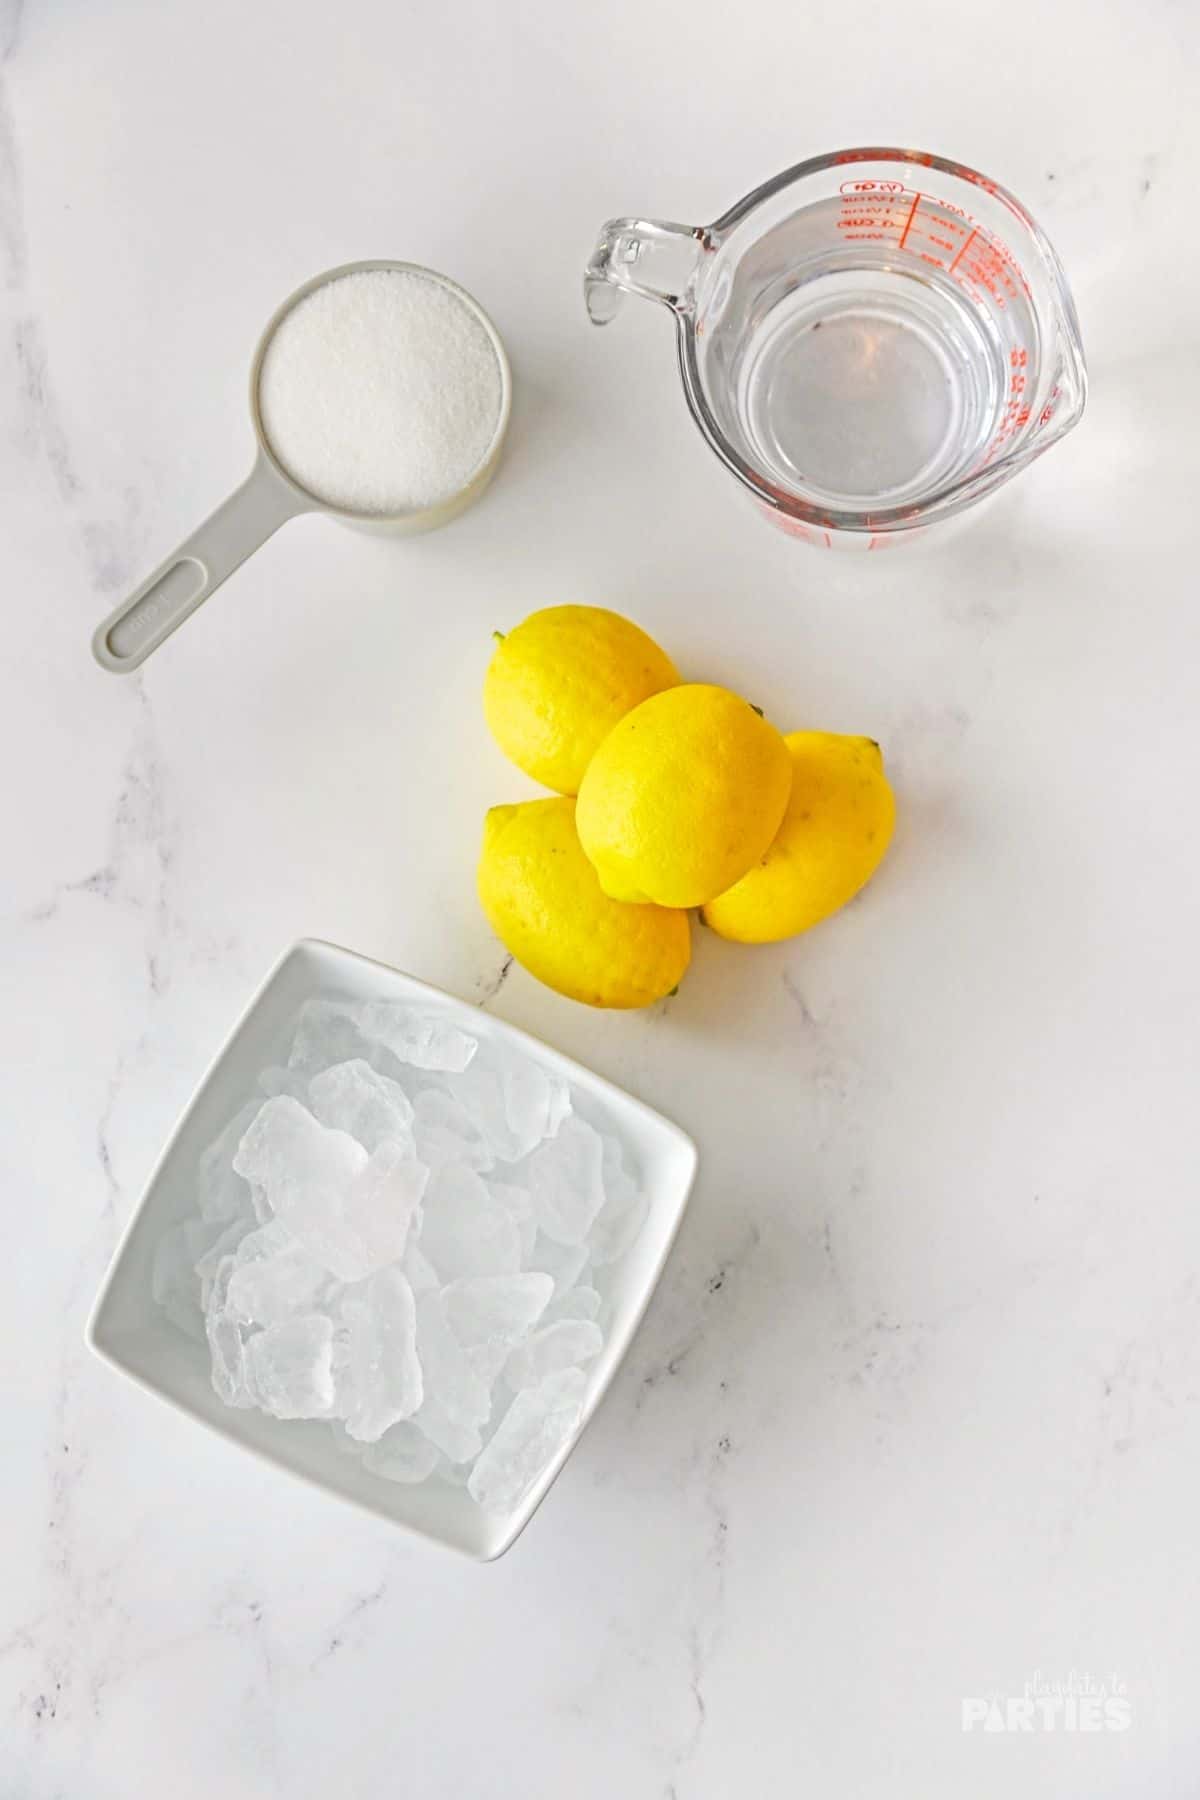 Lemons, water, ice, and sugar on a marble surface.